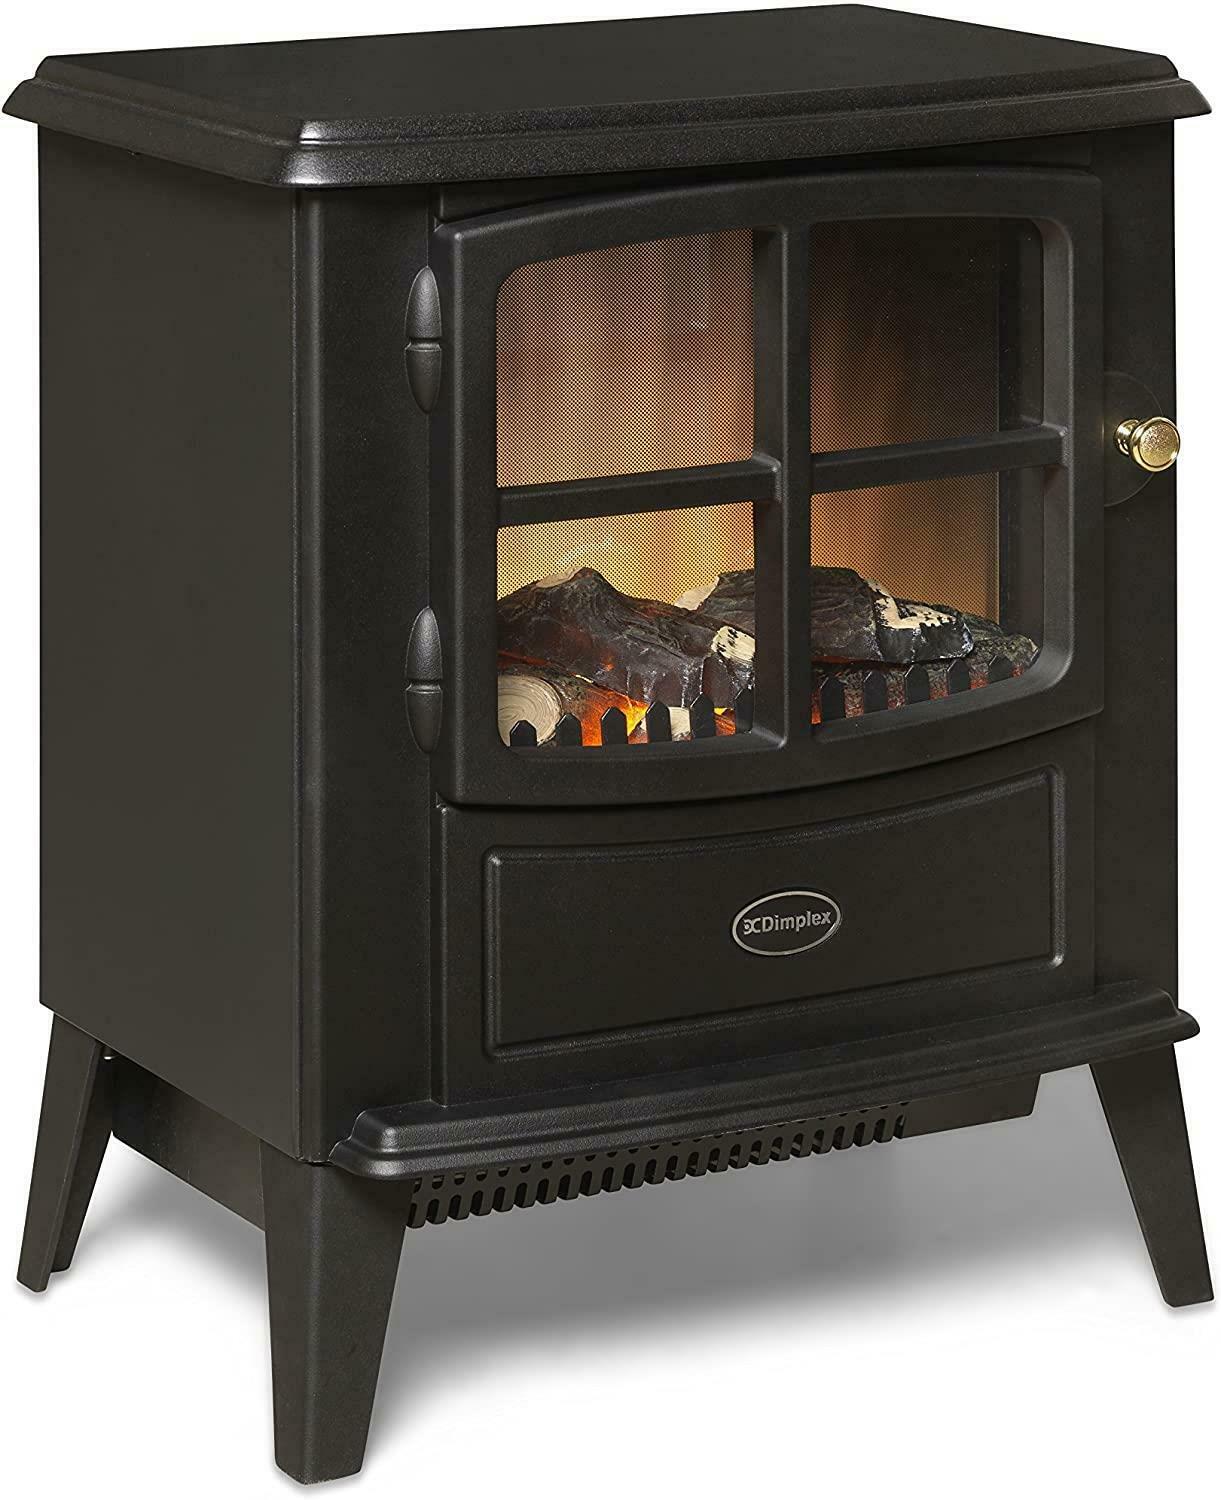 Dimplex-Brayford-Optiflame-Remote-Controlled-Stove